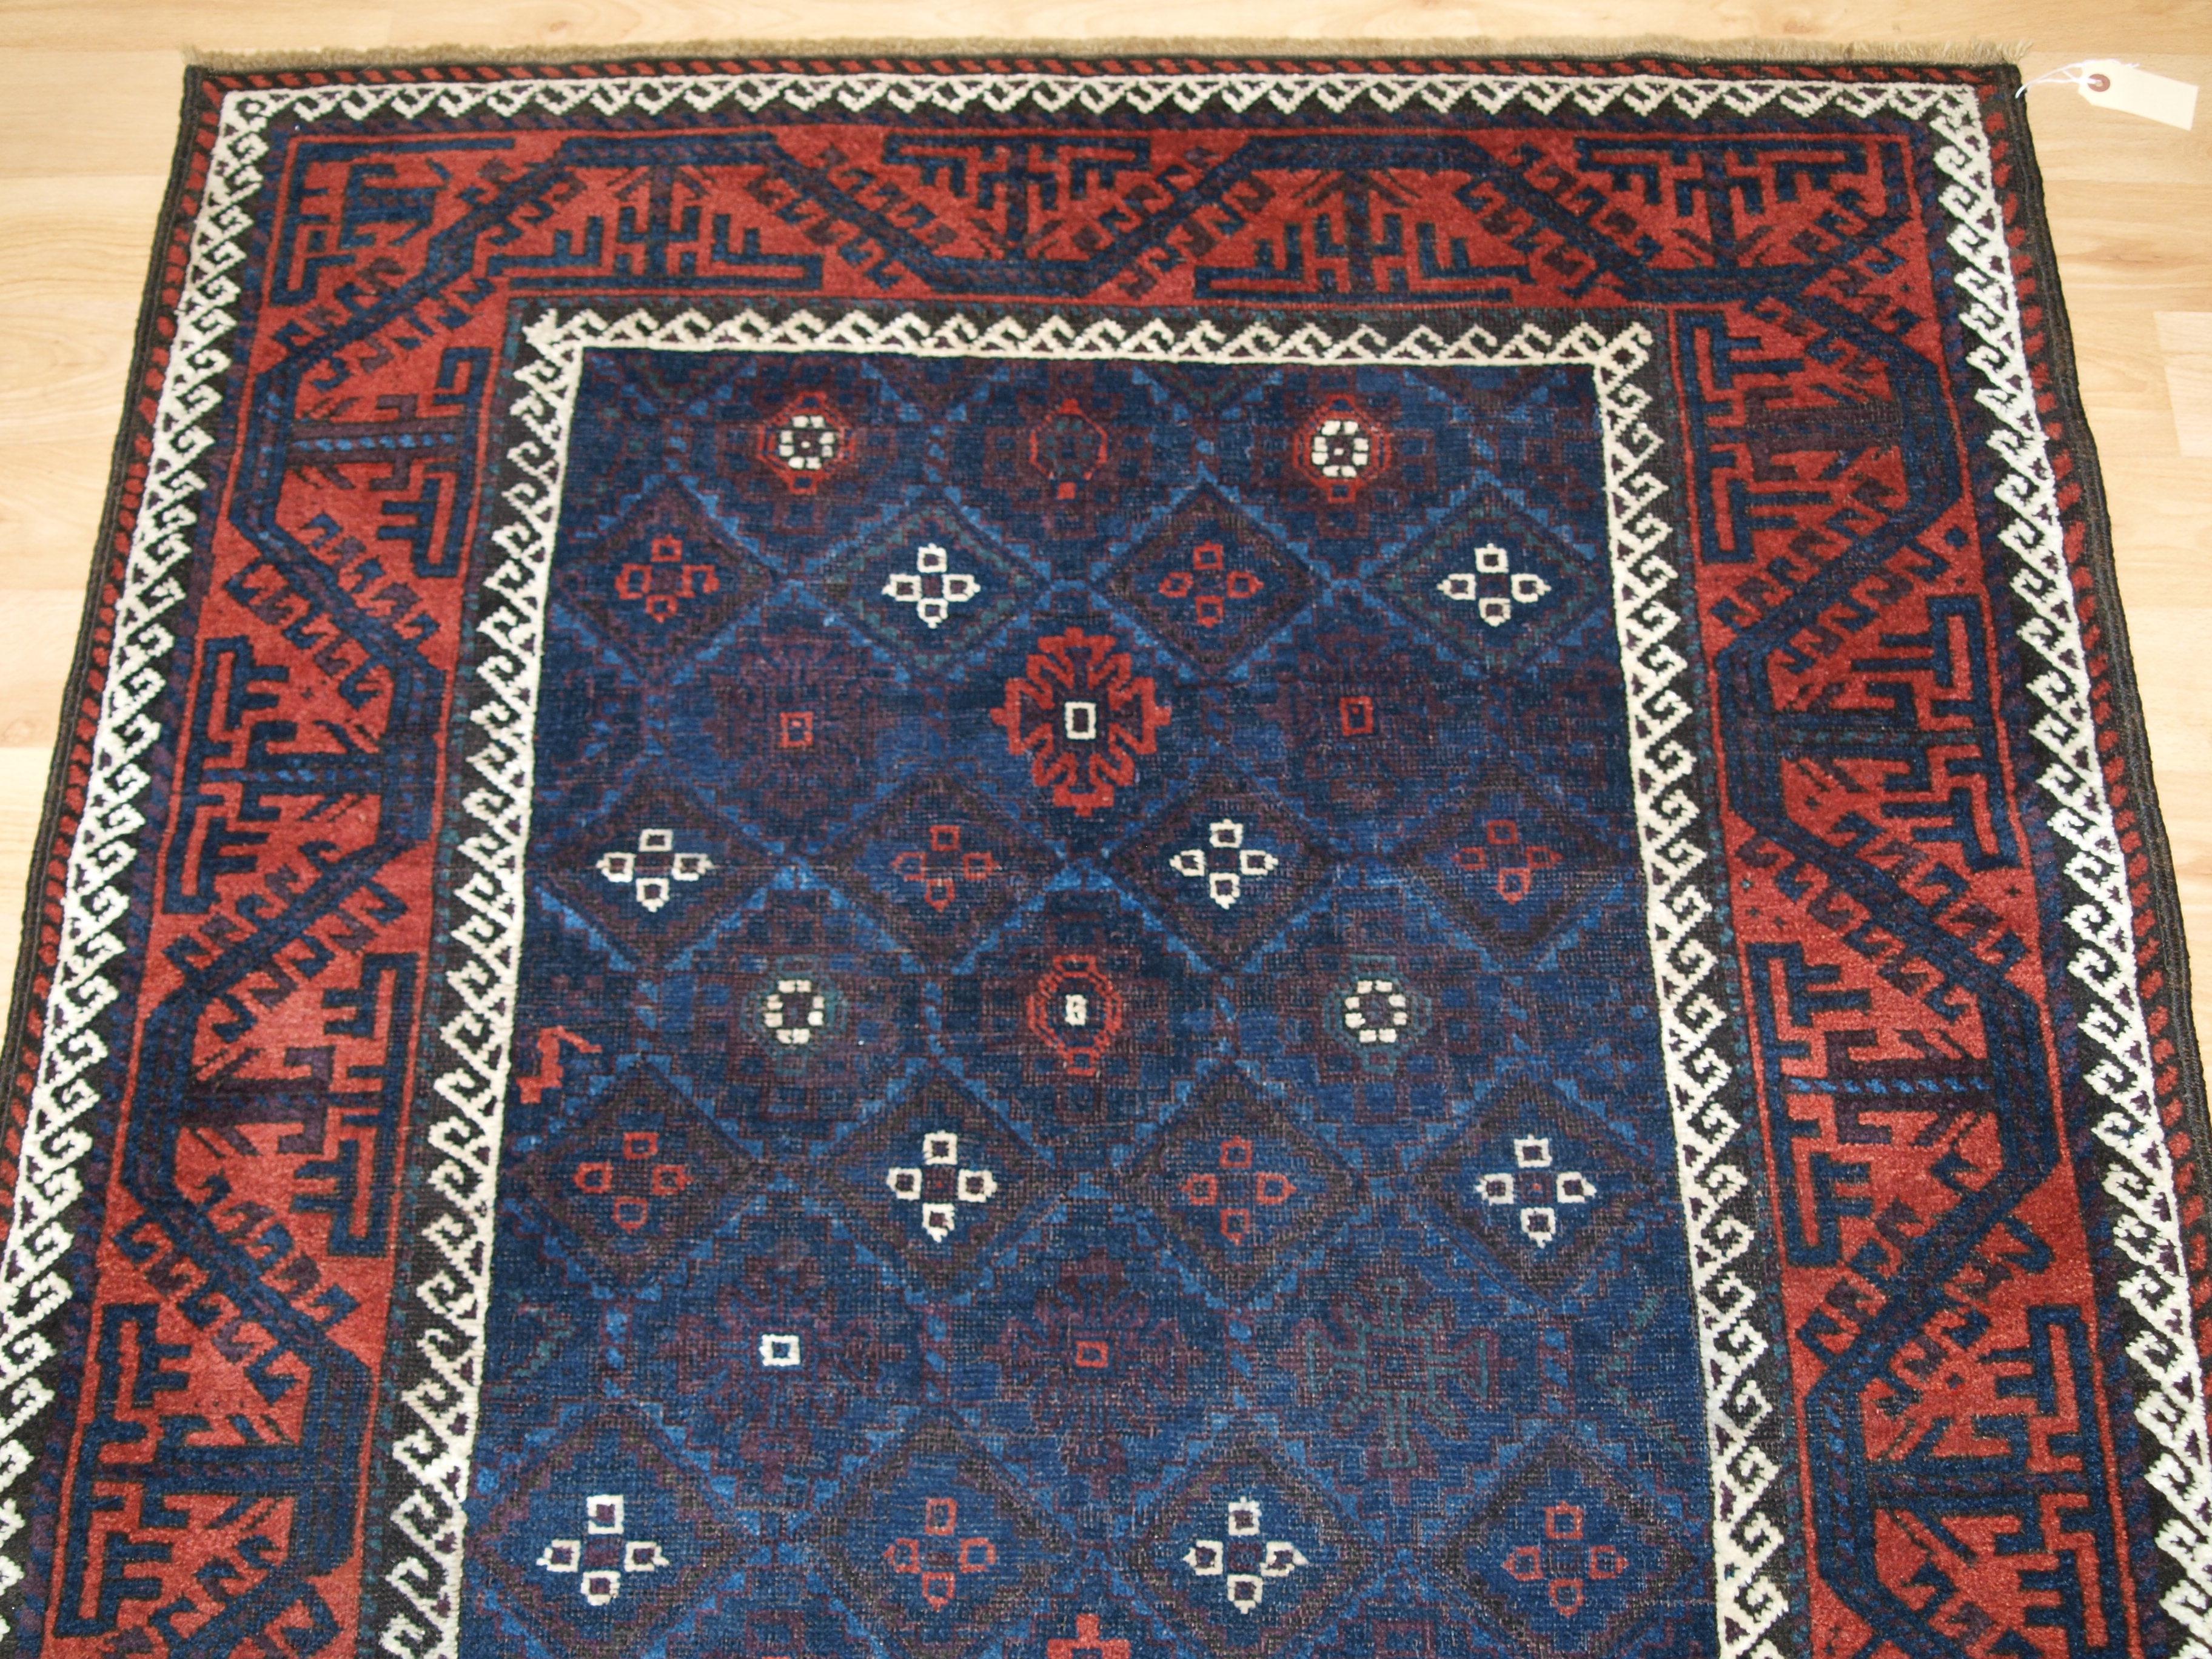 Antique Baluch Rug with blue lattice Design and red geometric border